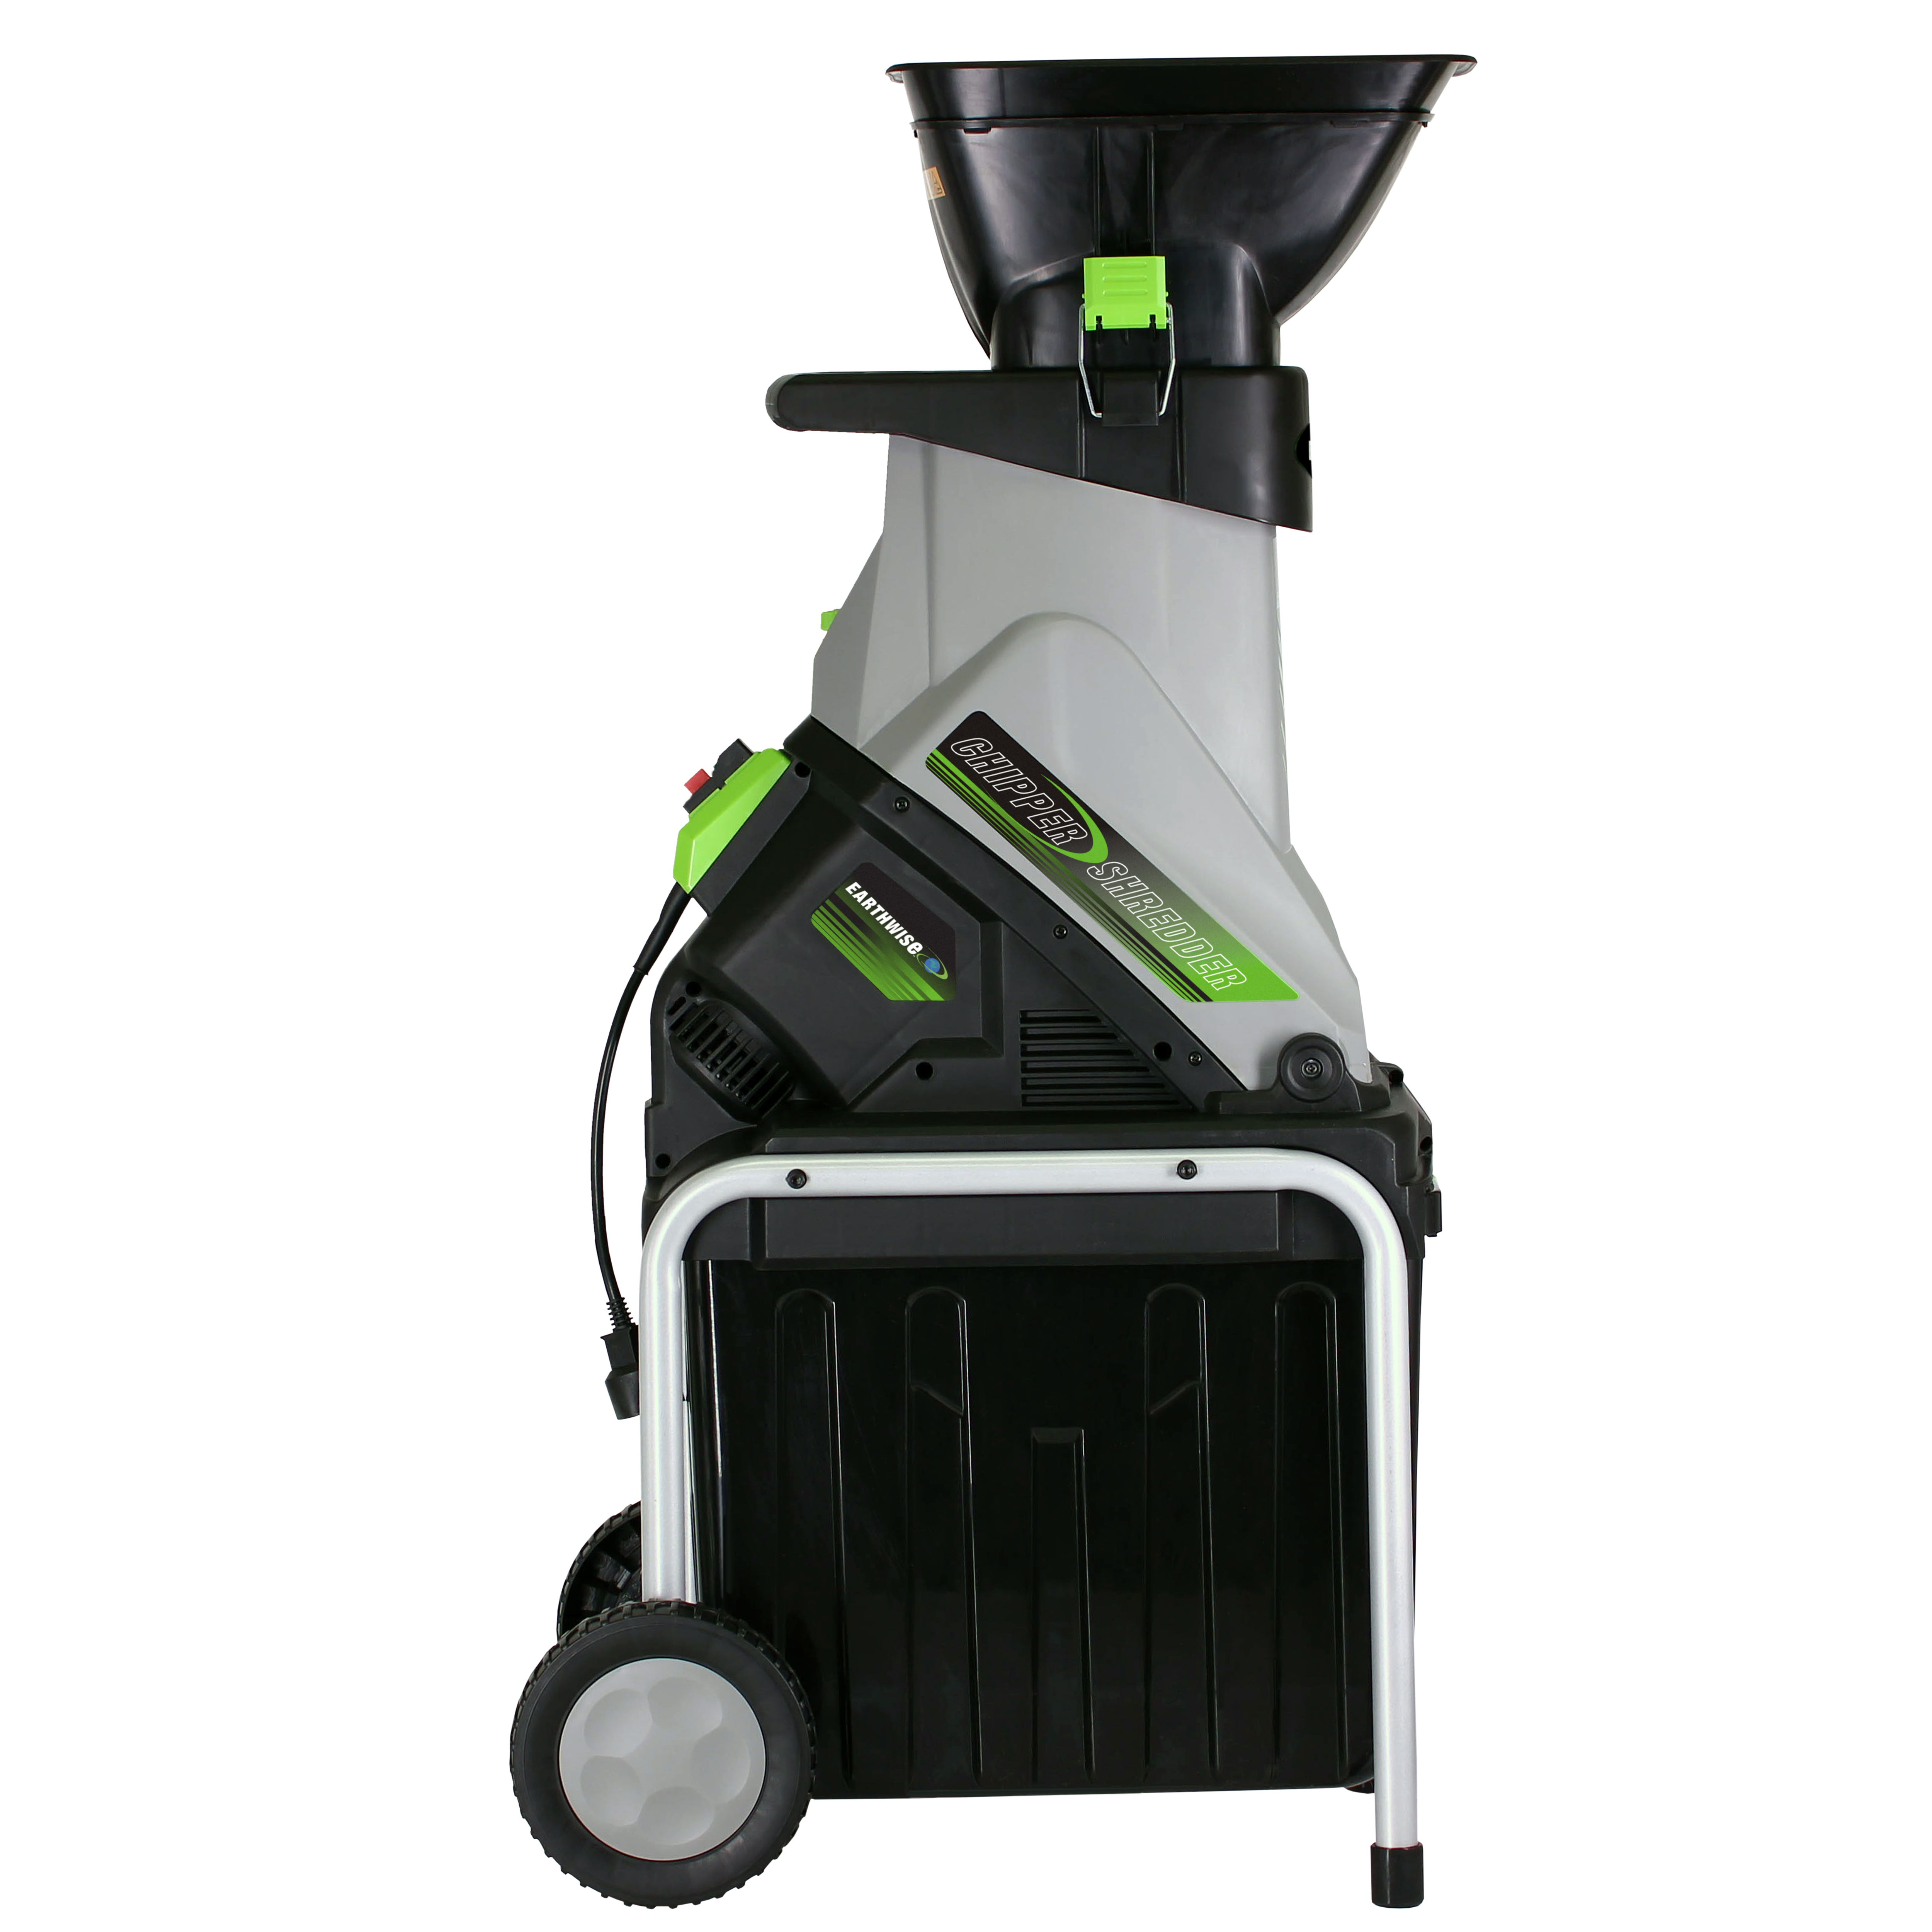 Earthwise GS70015 15-Amp Corded Electric Garden Chipper/Shredder with Collection Bin - image 3 of 7